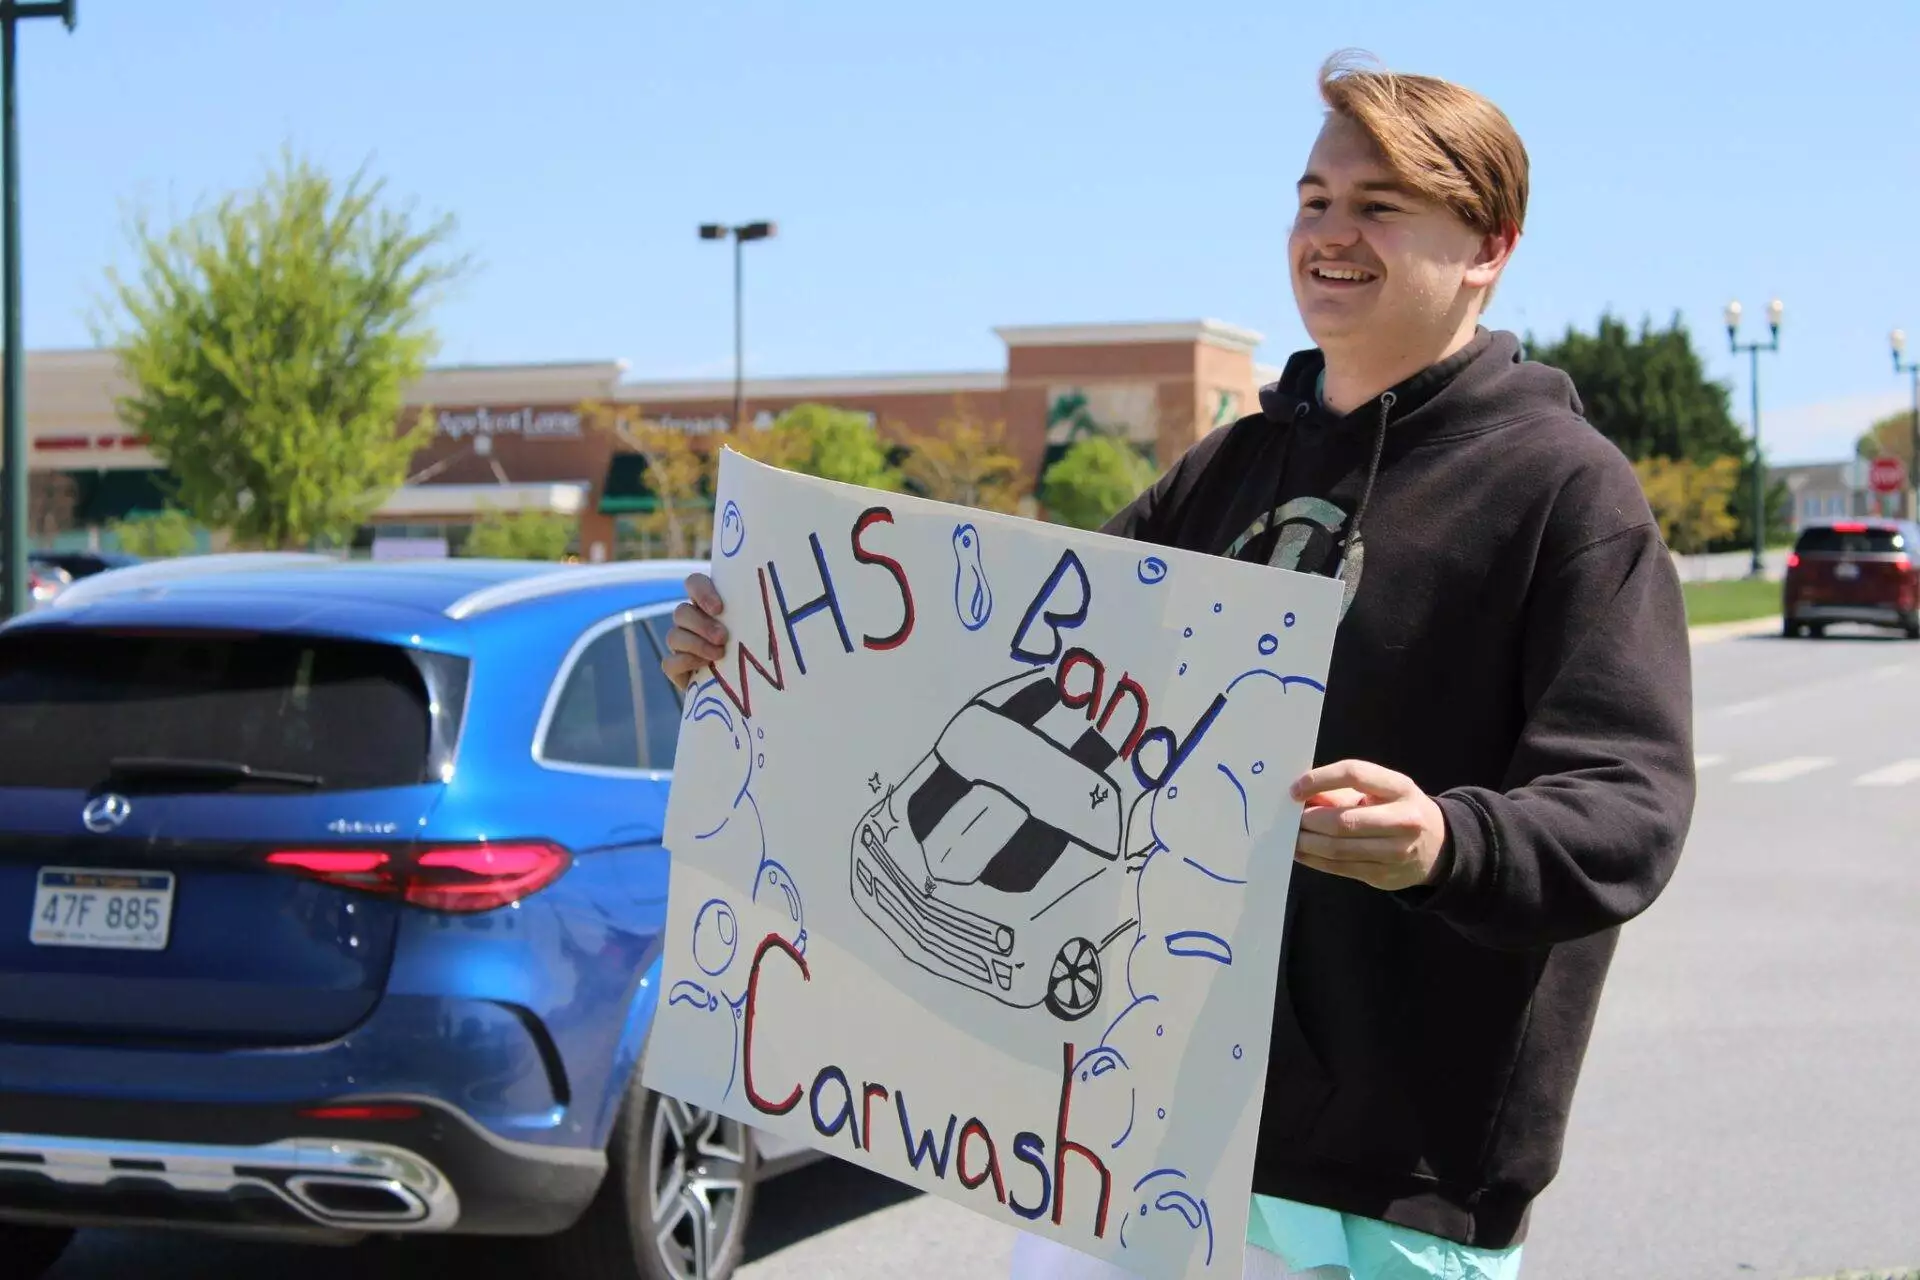 A young man holding a sign advertising a high school band car wash on a sunny day, with cars and a shopping complex in the background.